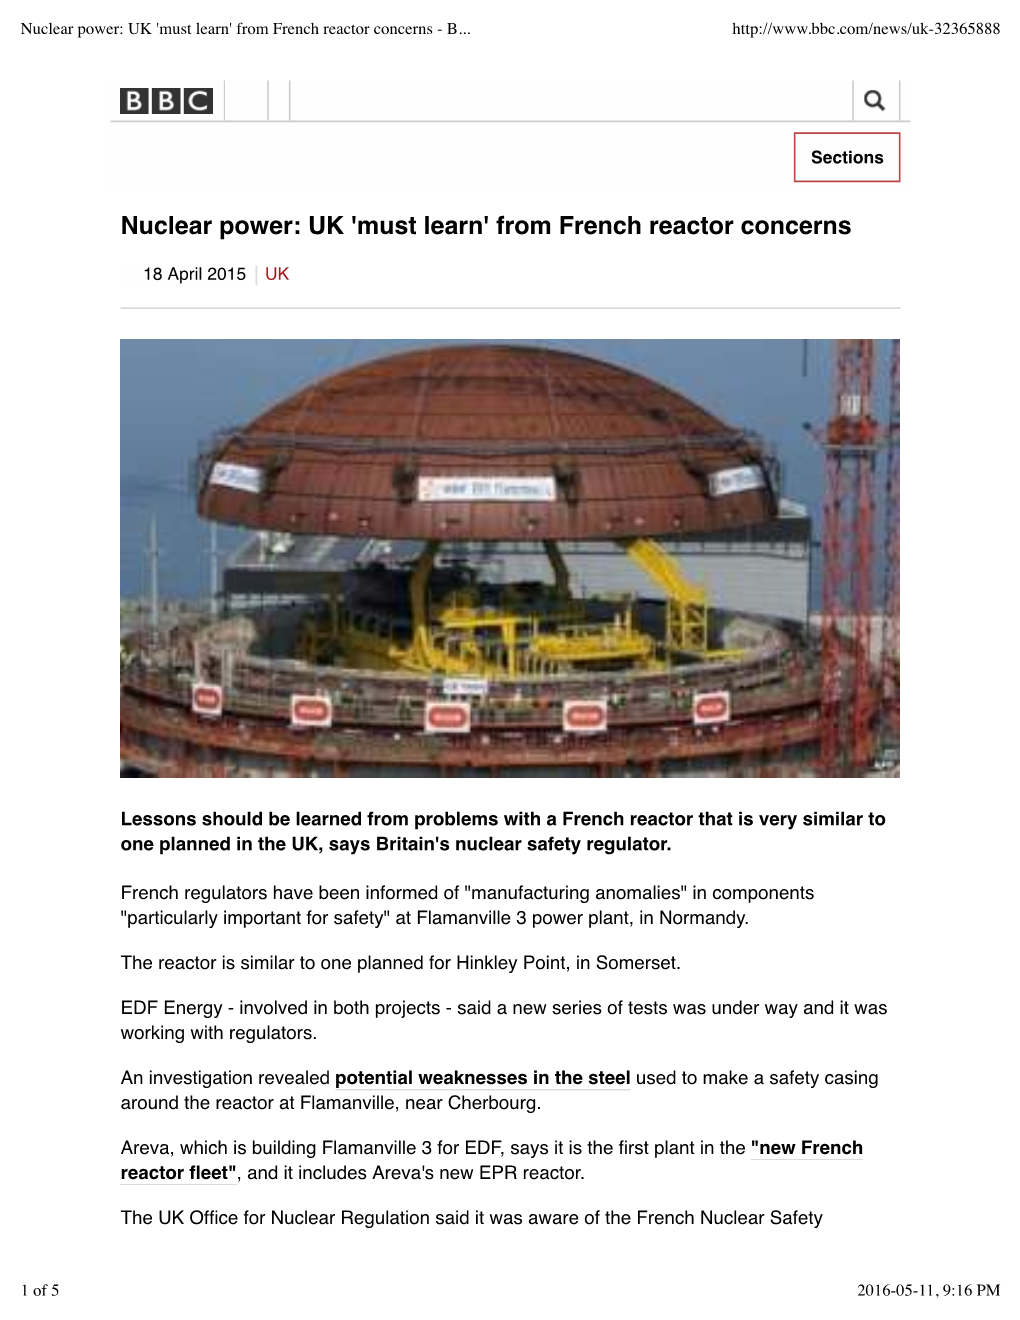 Nuclear Power: UK 'Must Learn' from French Reactor Concerns - B